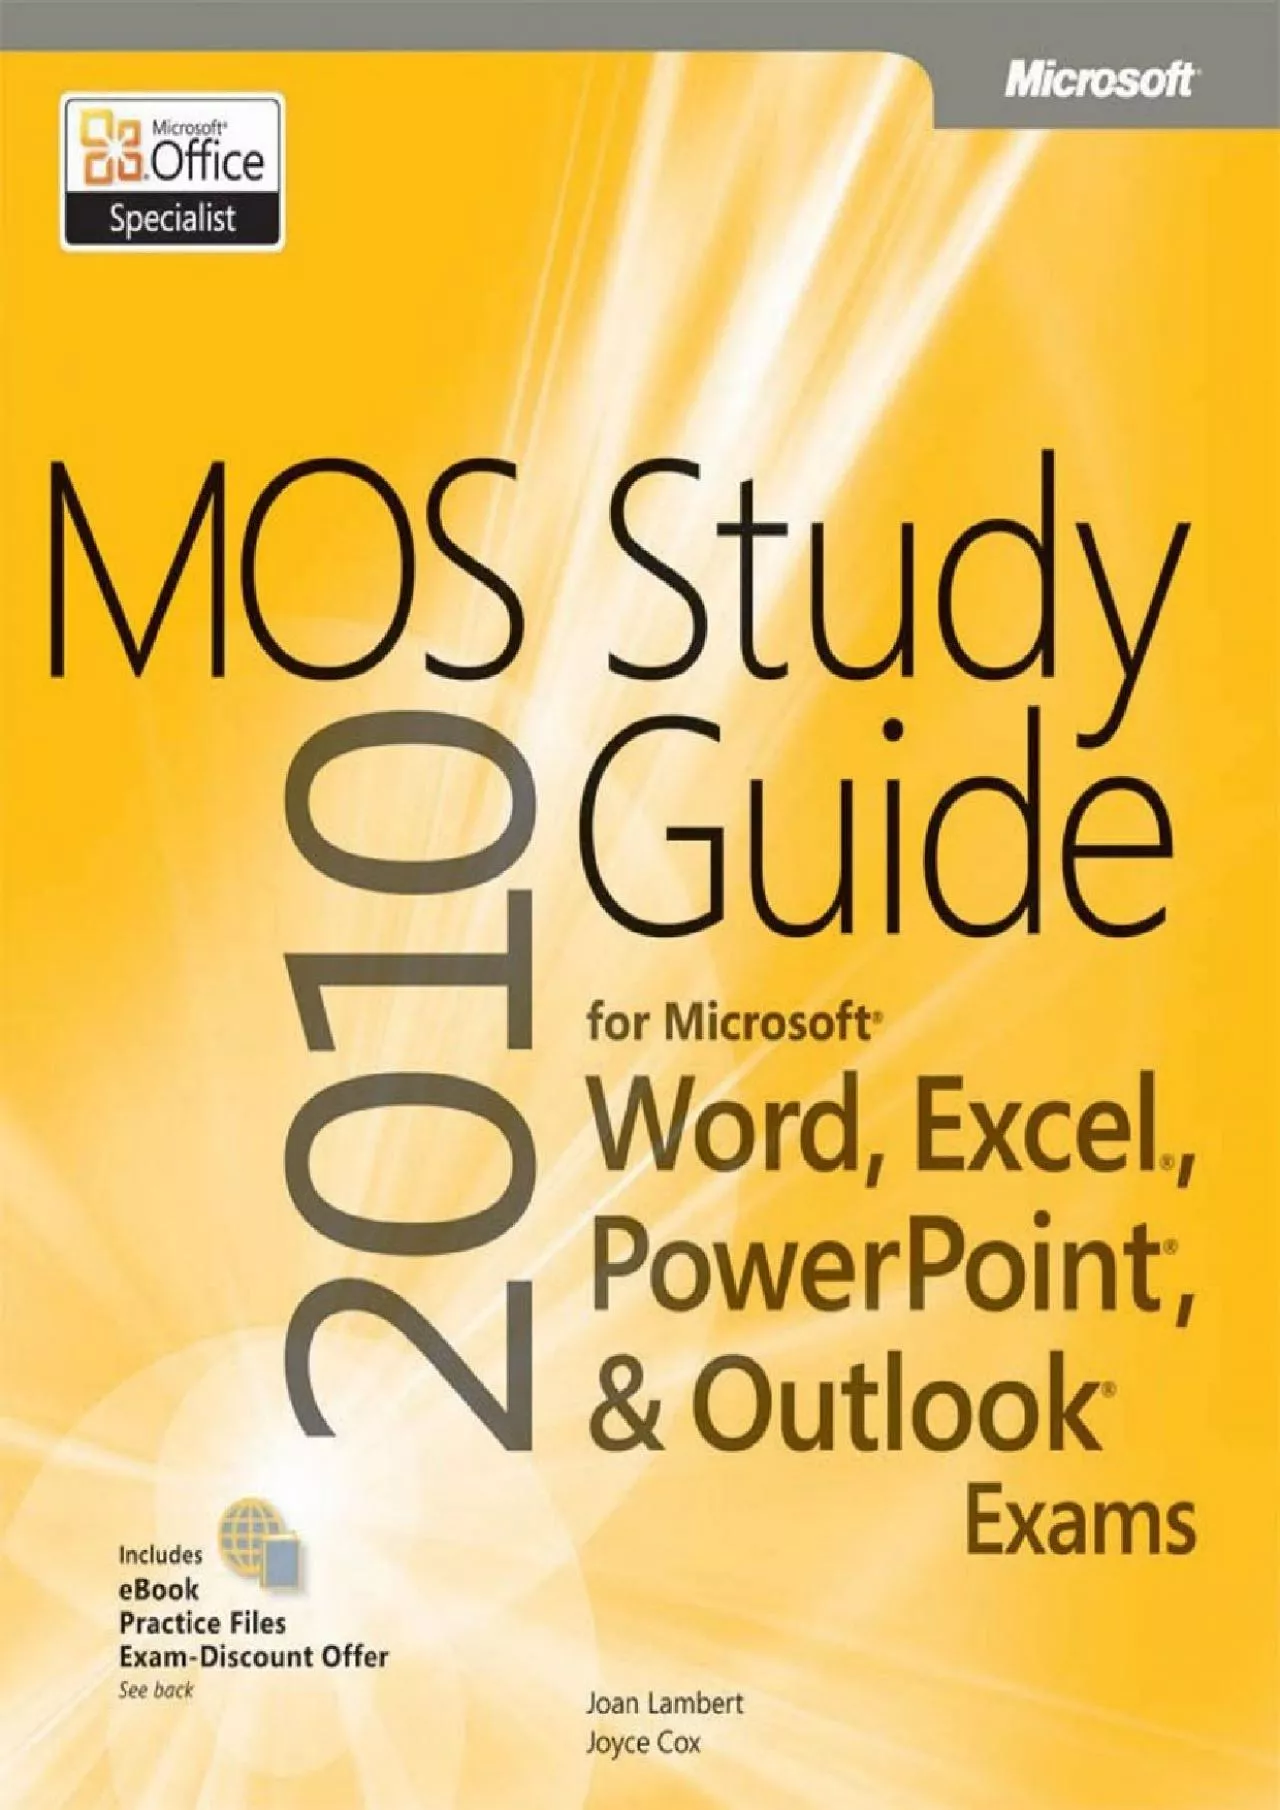 (BOOS)-MOS 2010 Study Guide for Microsoft Word, Excel, PowerPoint, and Outlook Exams (MOS